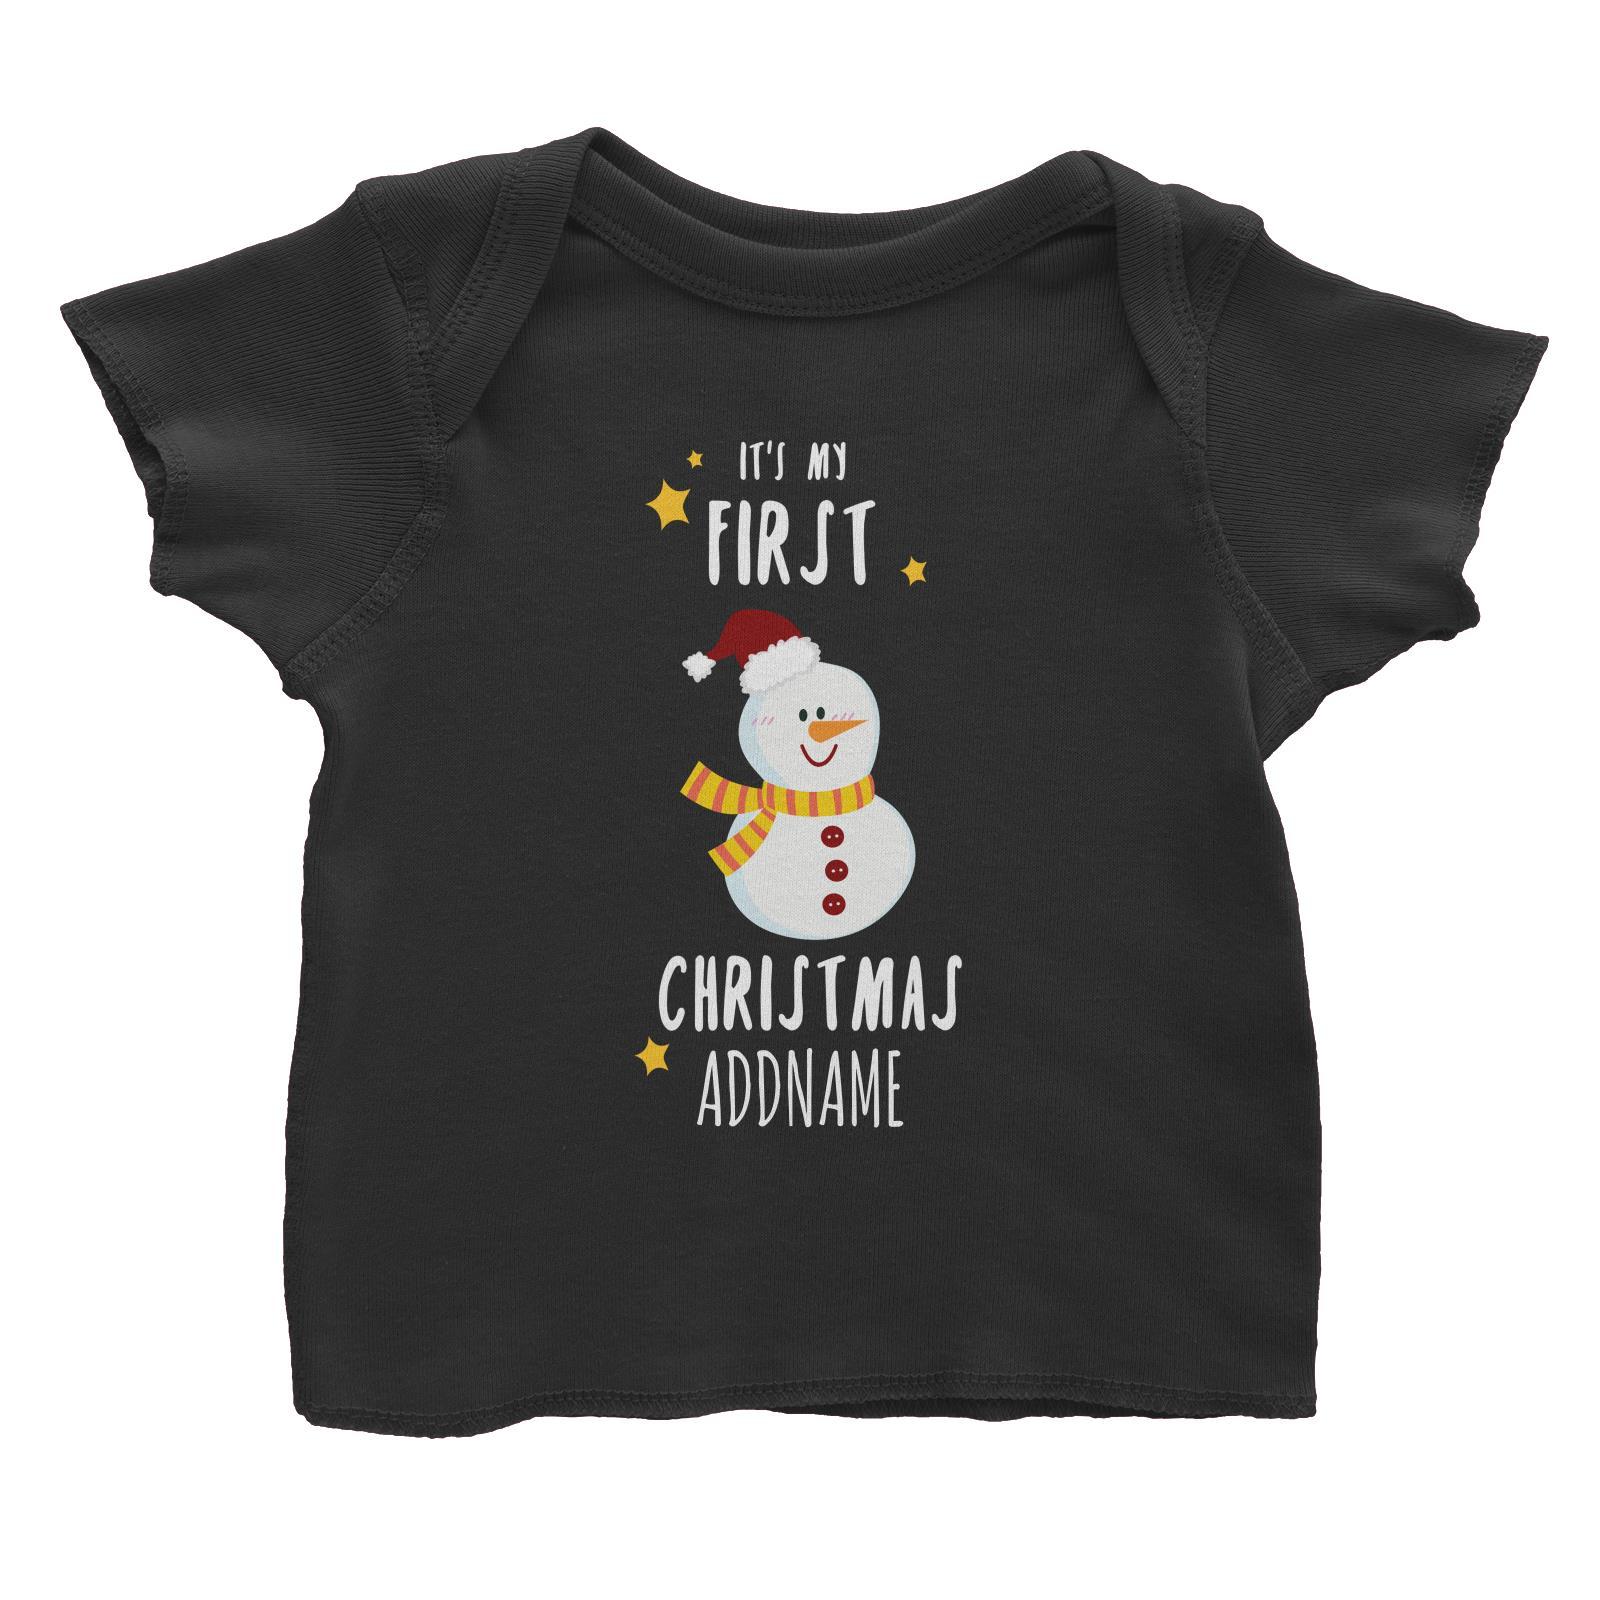 Cute Snowman First Christmas Addname Baby T-Shirt  Personalizable Designs